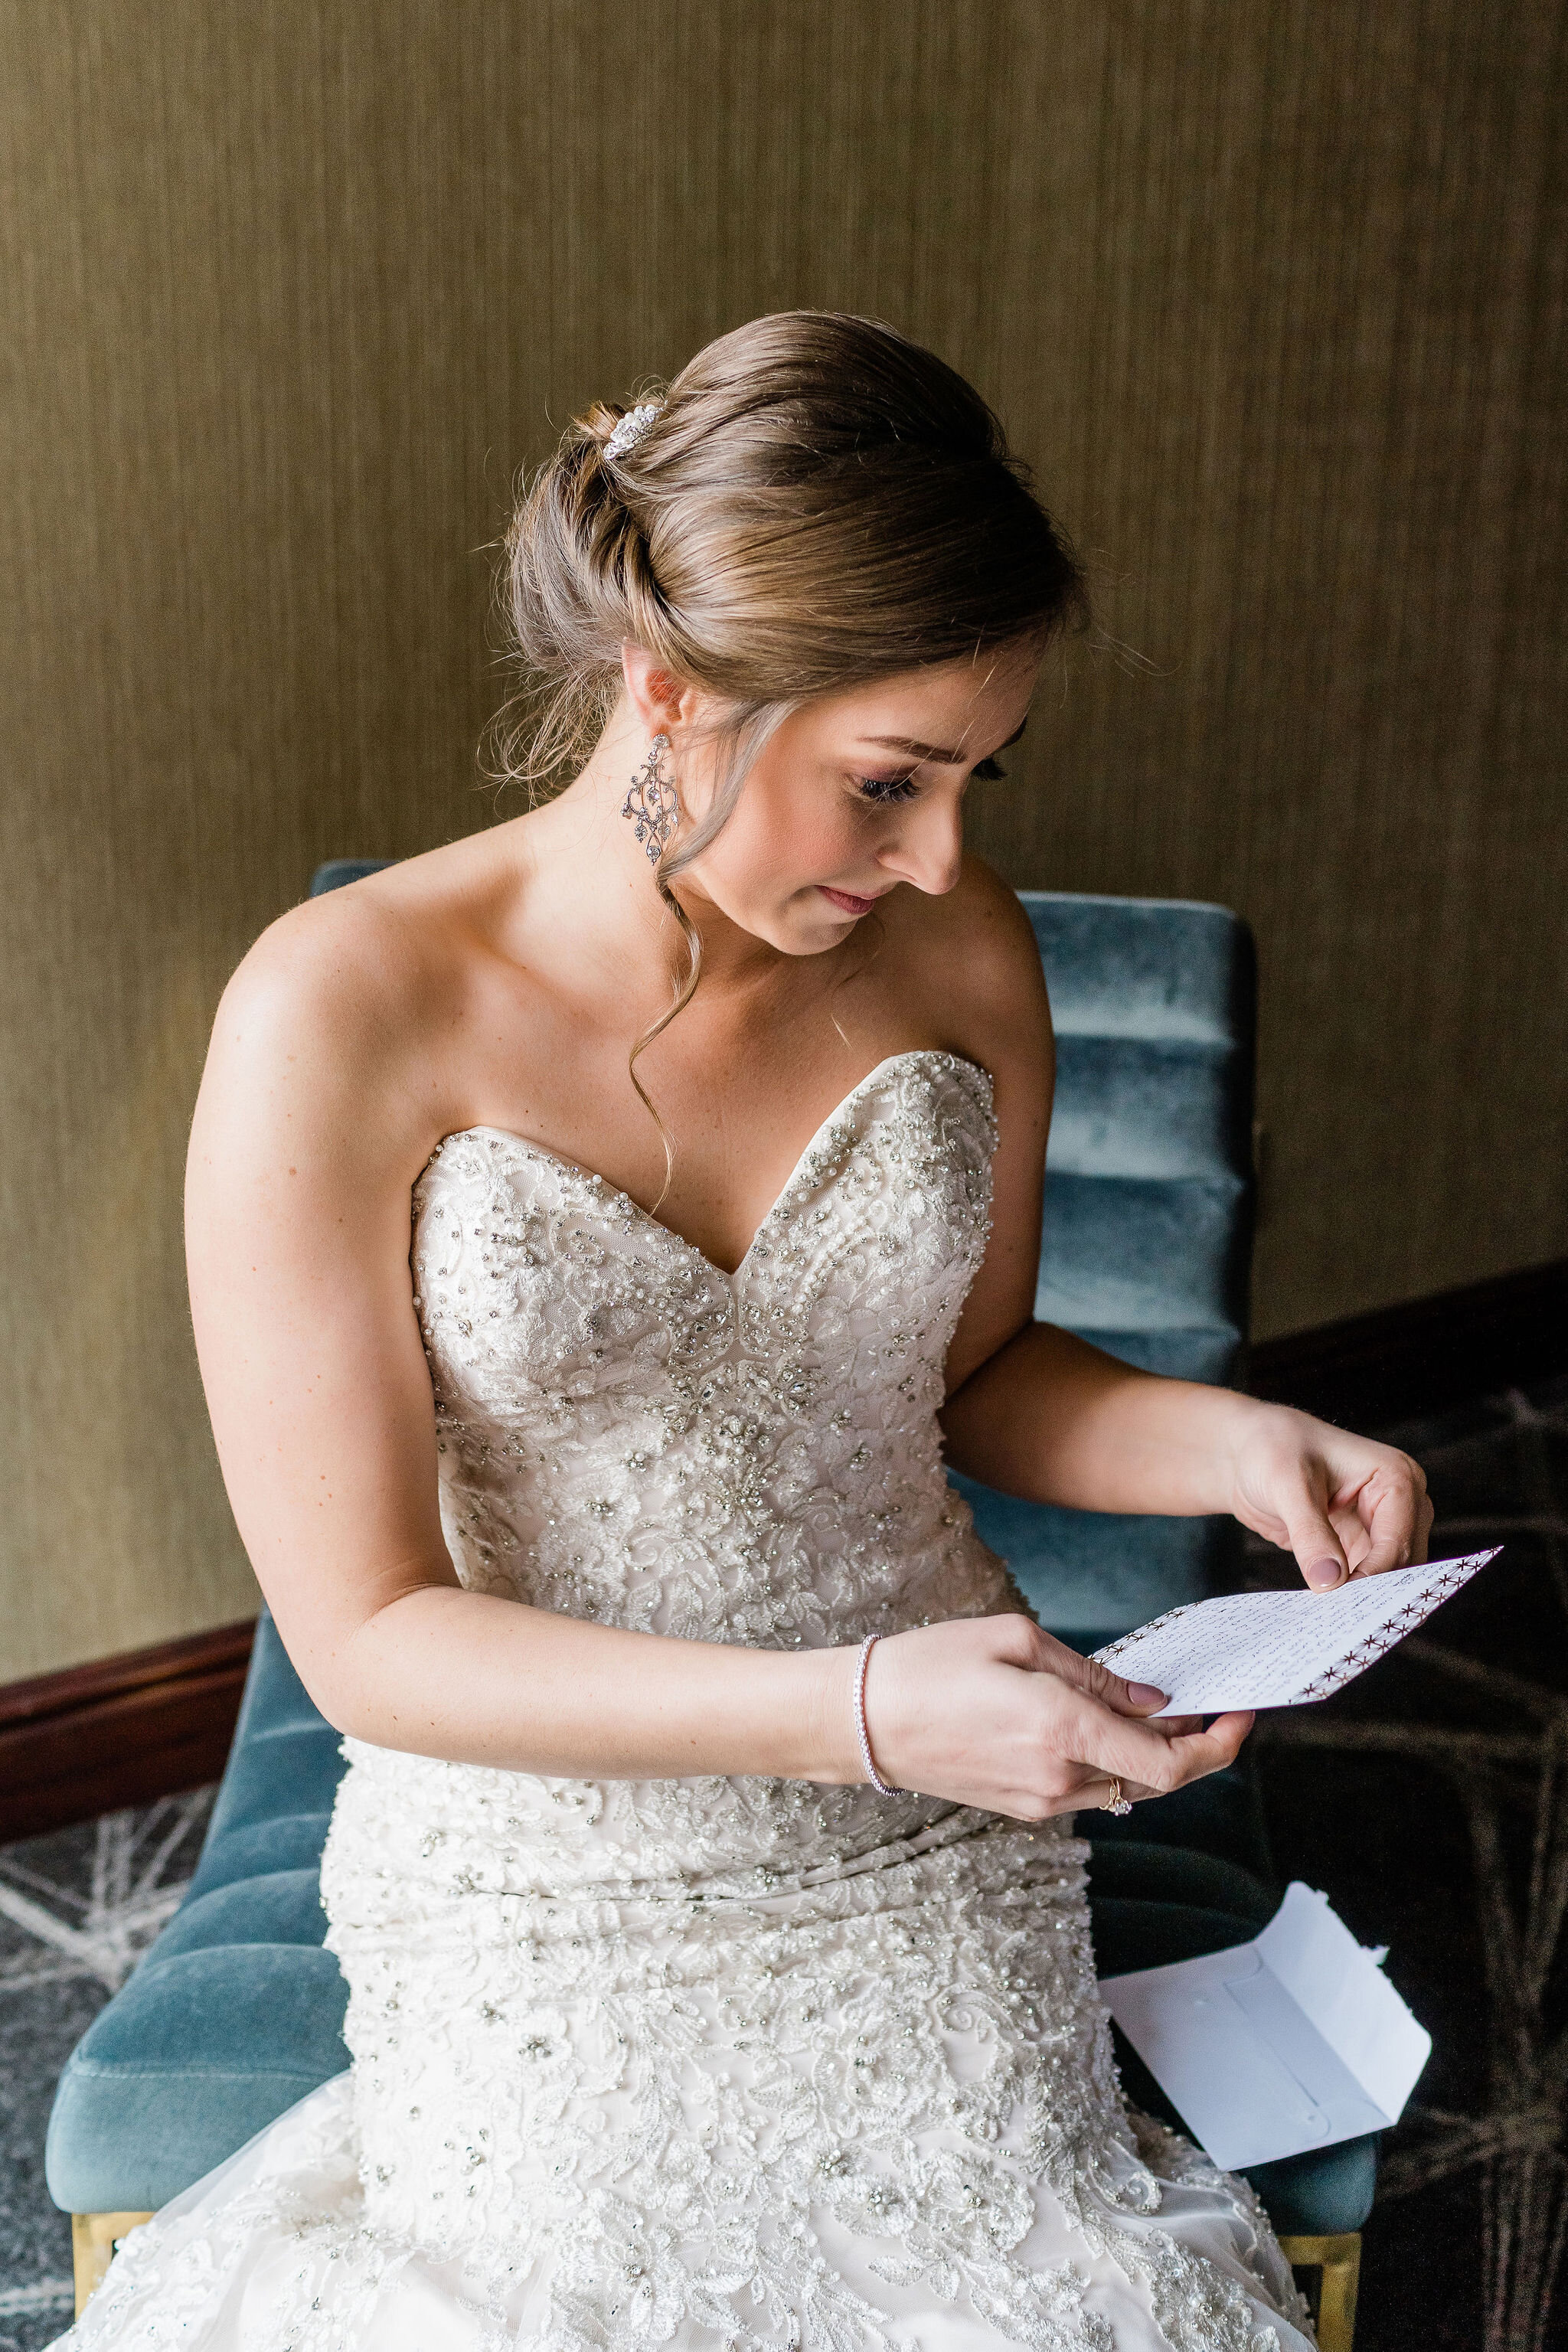 Bride reading a letter from the groom